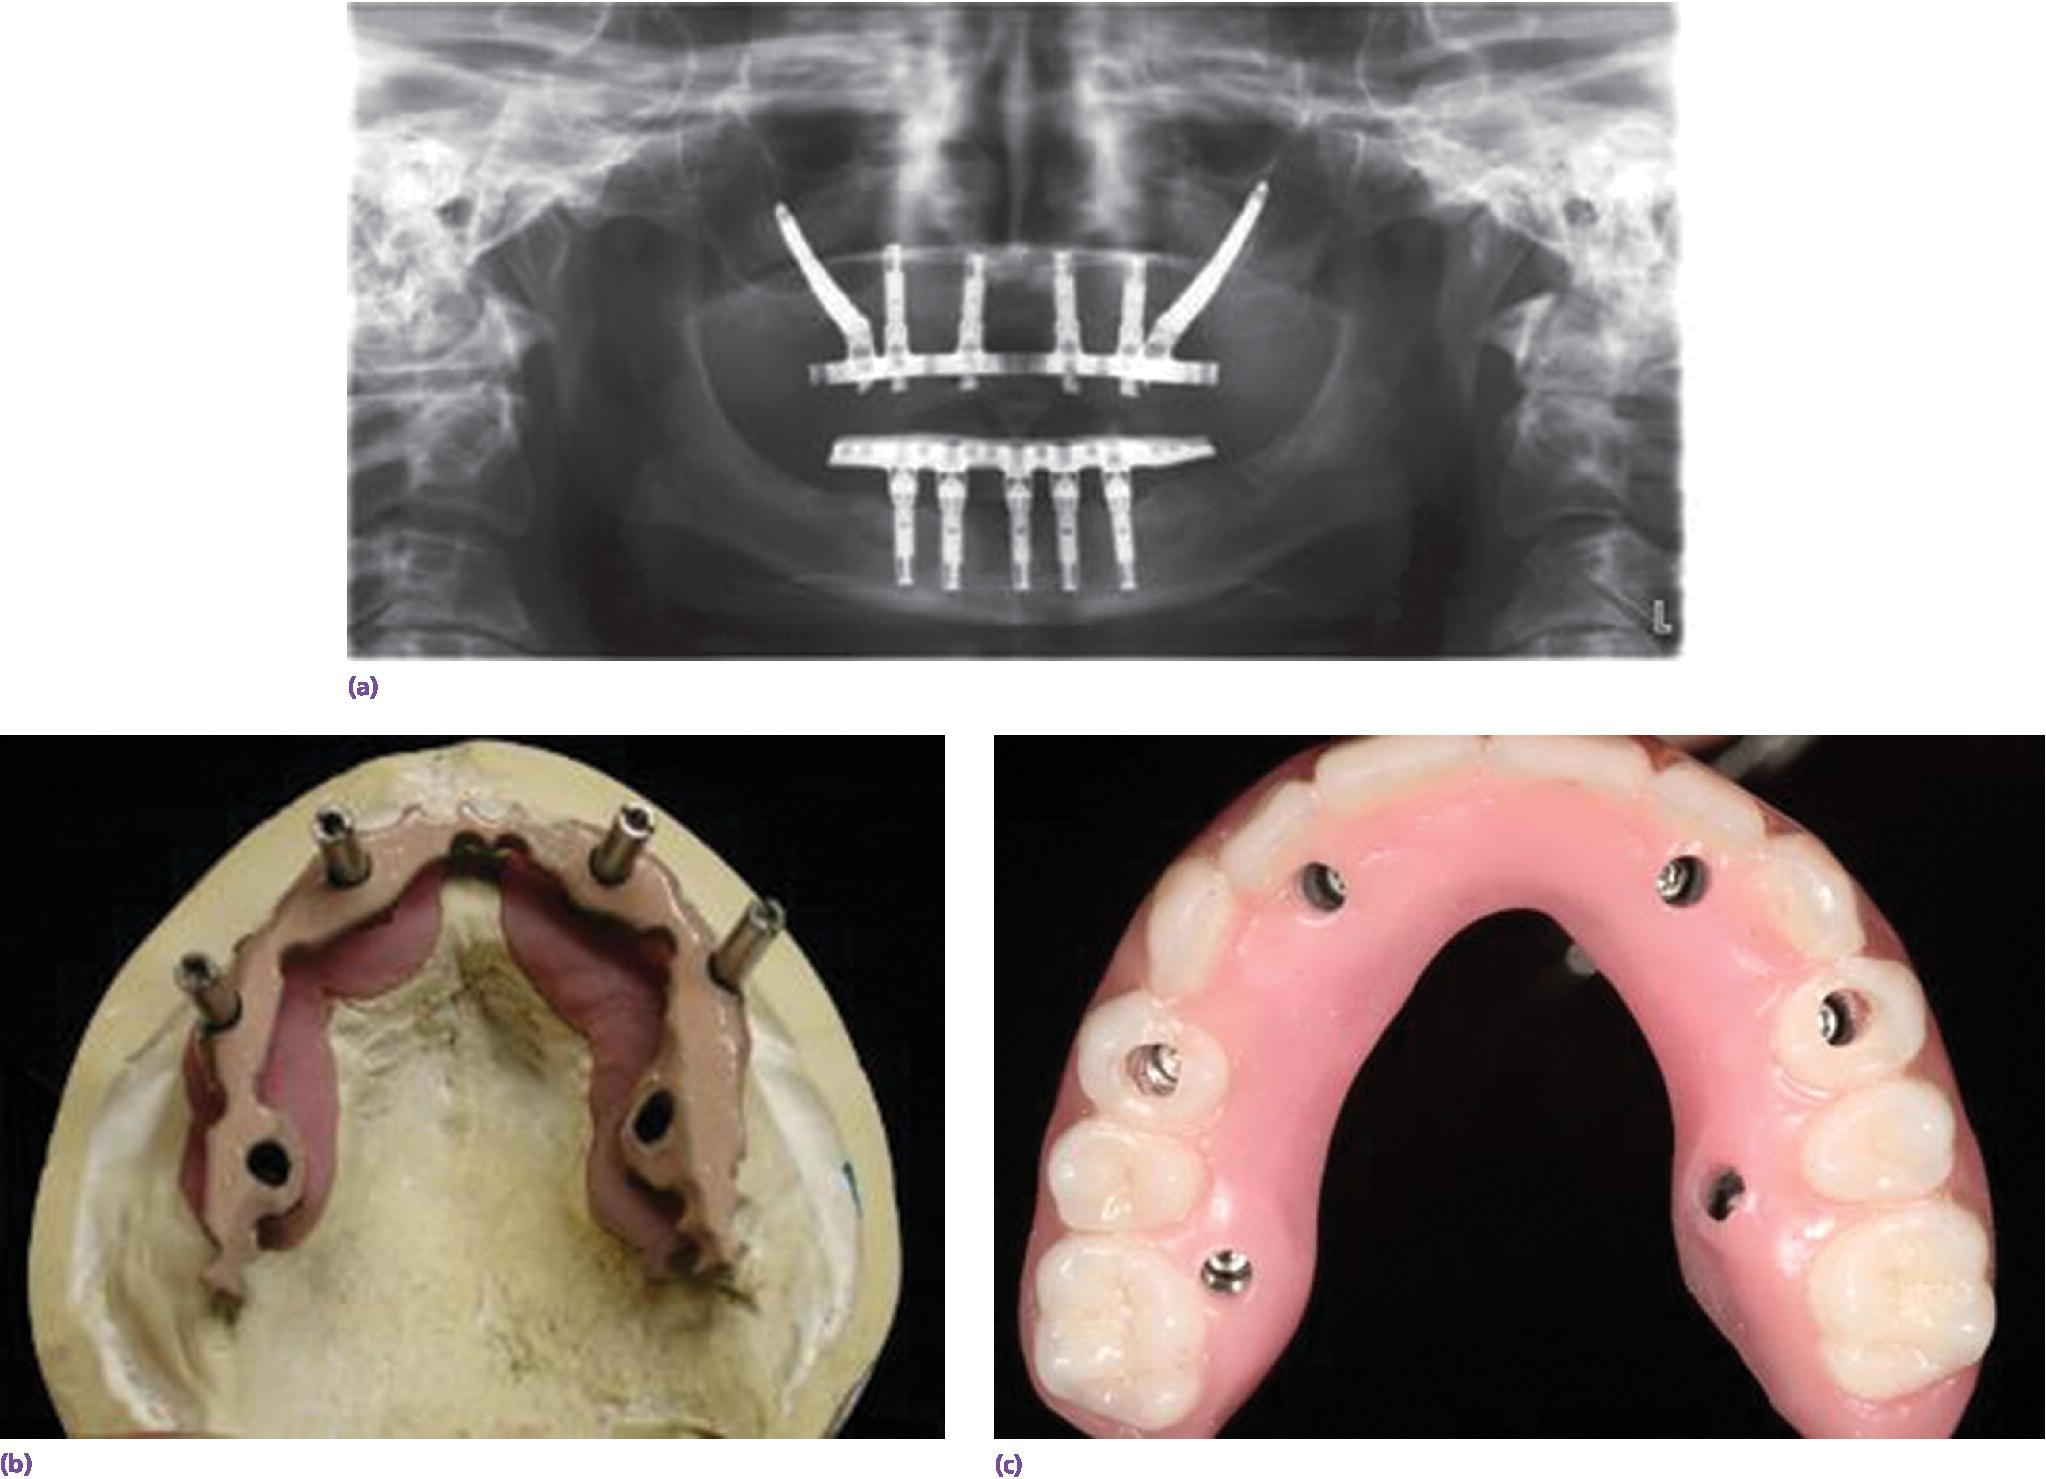 Radiograph of patient treated for anhidrotic ectodermal dysplasia and 10-year follow-up indicating servicing need with multiple acrylic tooth replacements (top). Photo of silicoated frameworks(bottom).